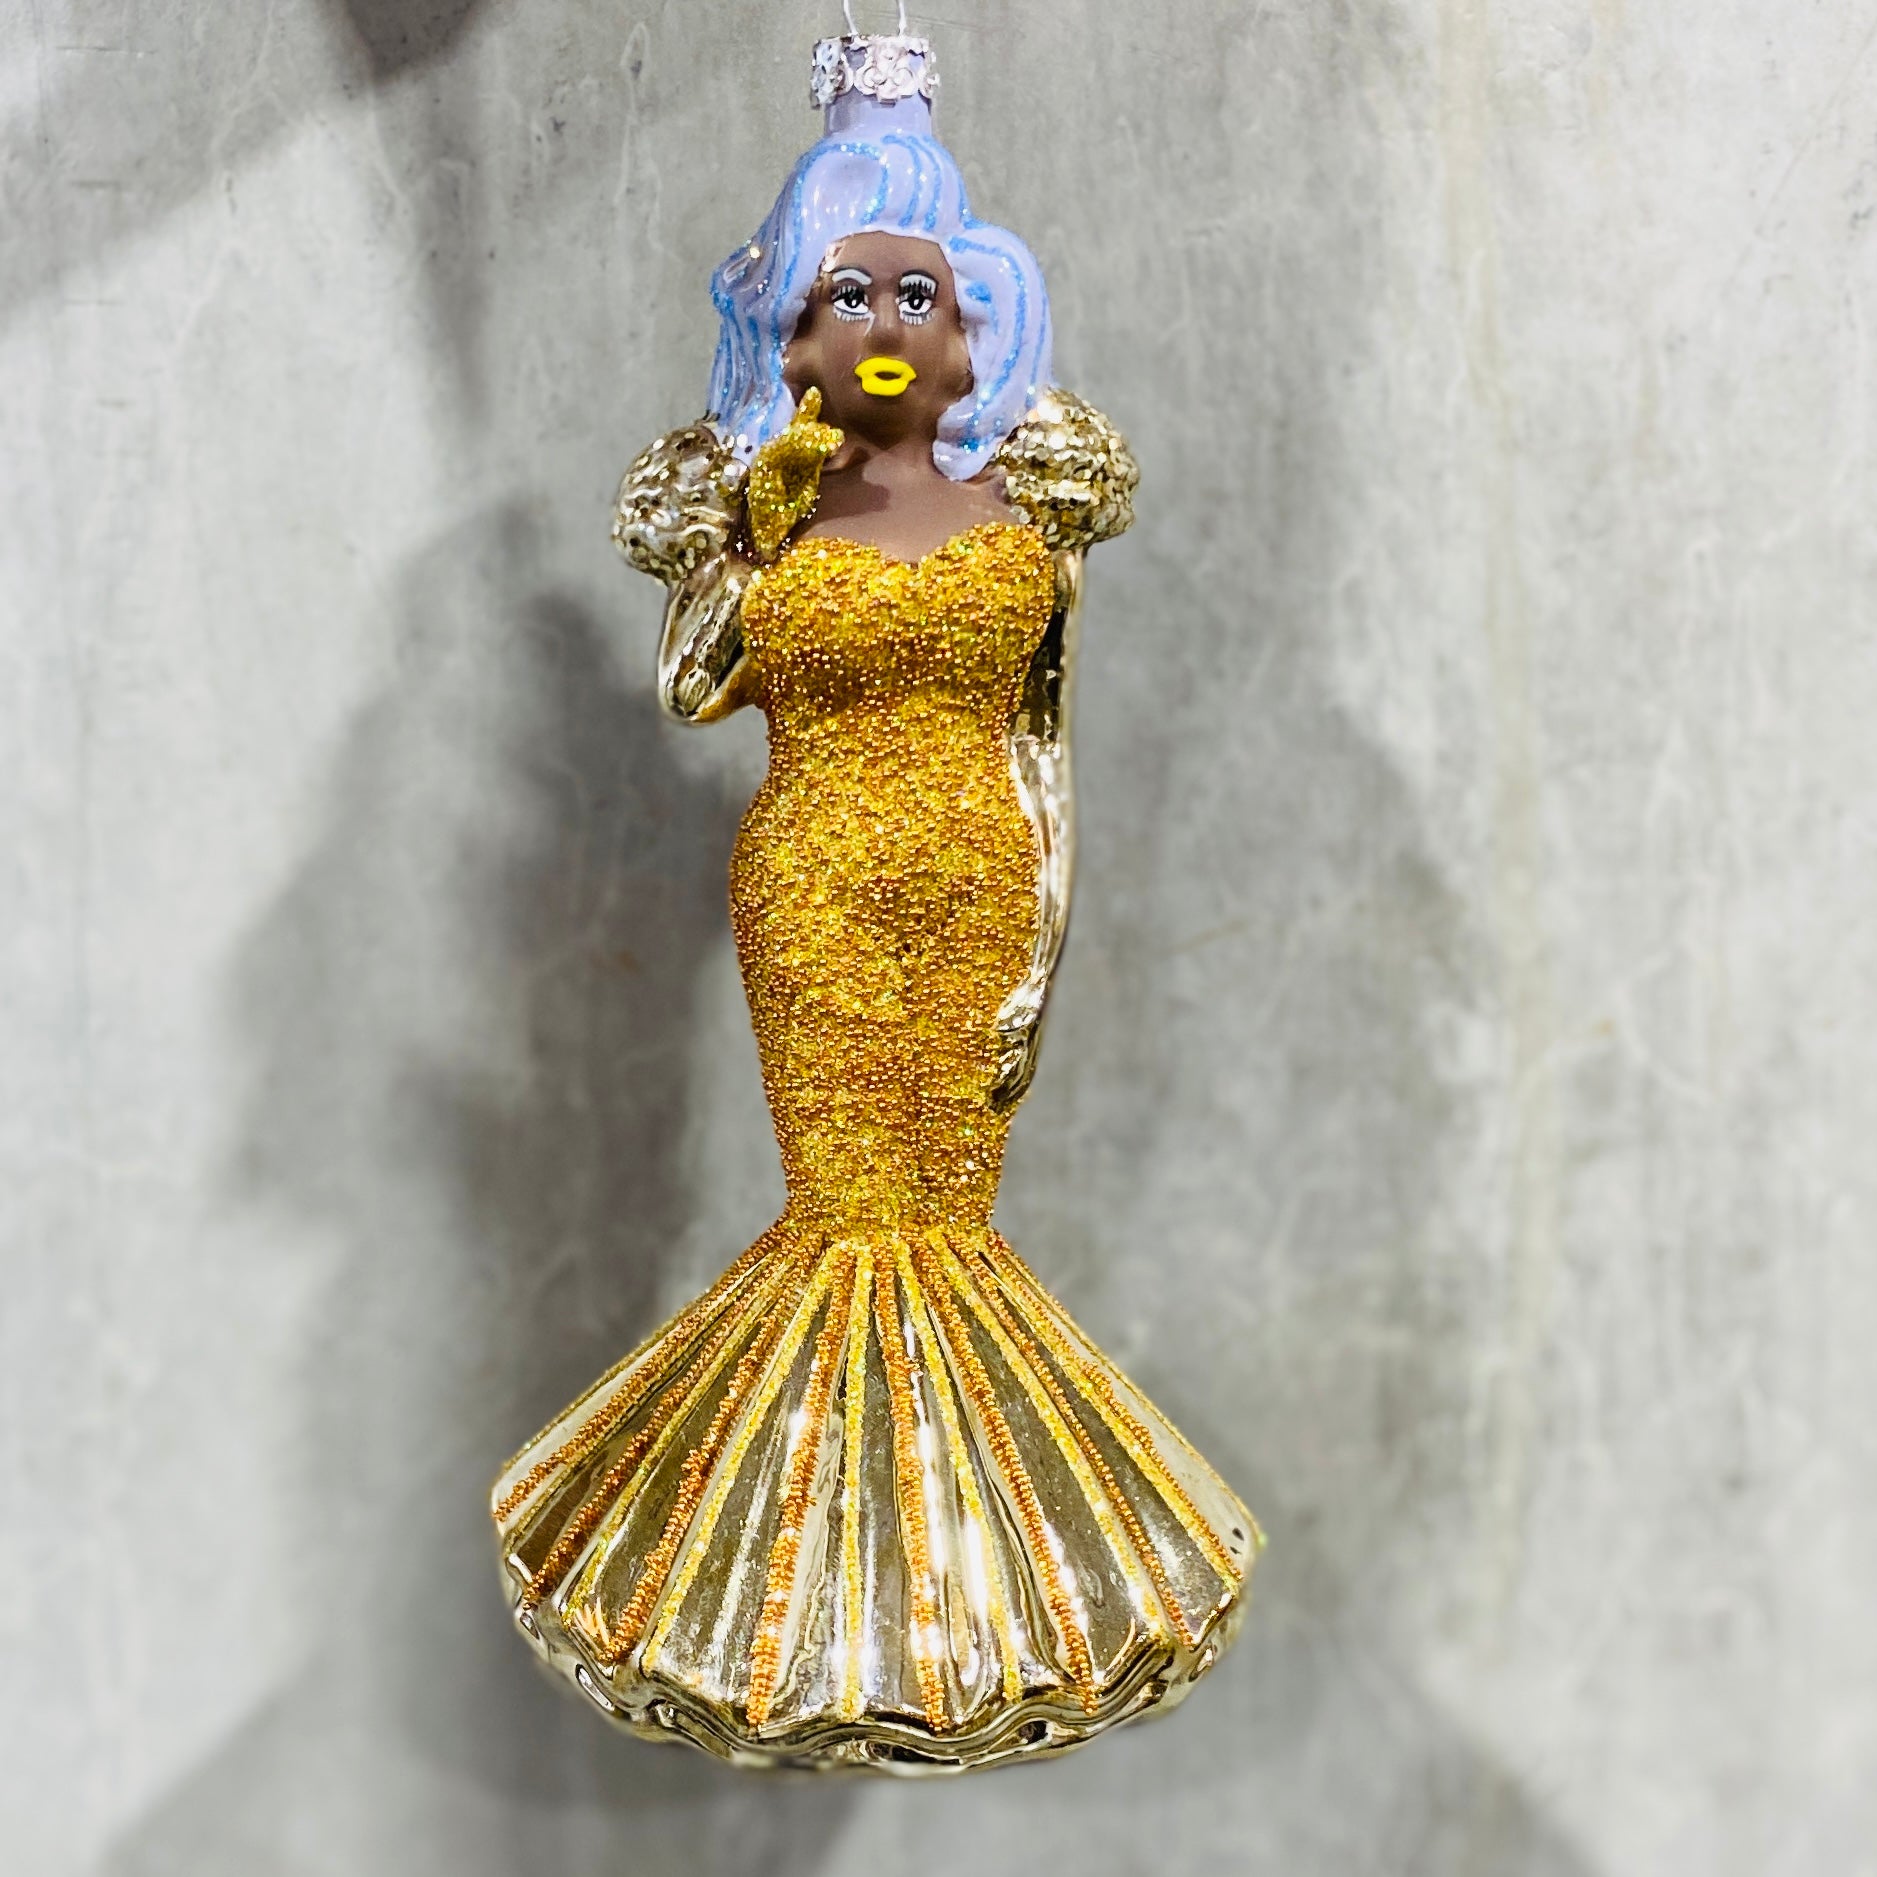 Resin holiday Drag Queen ornament - available at scouthouse.com.au